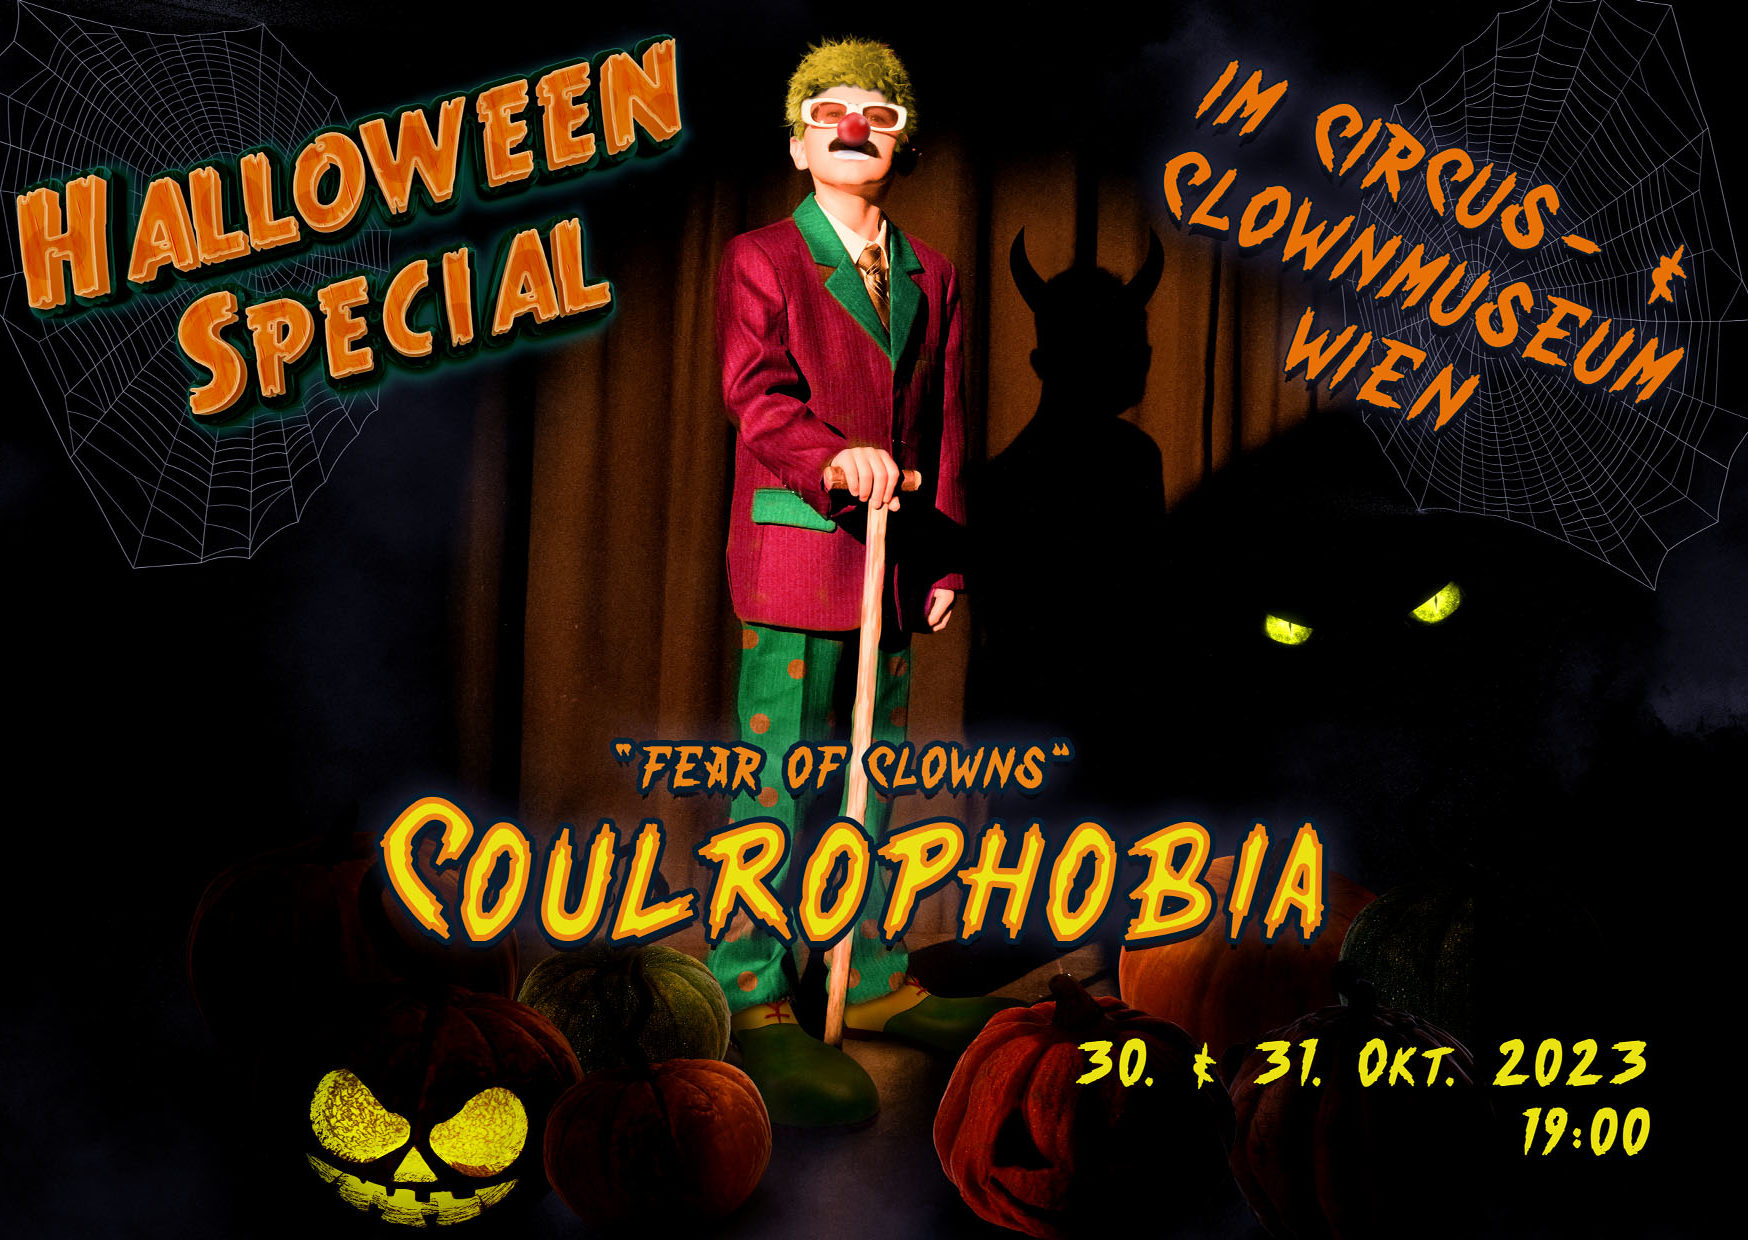 Halloween Special - Coulrophobia